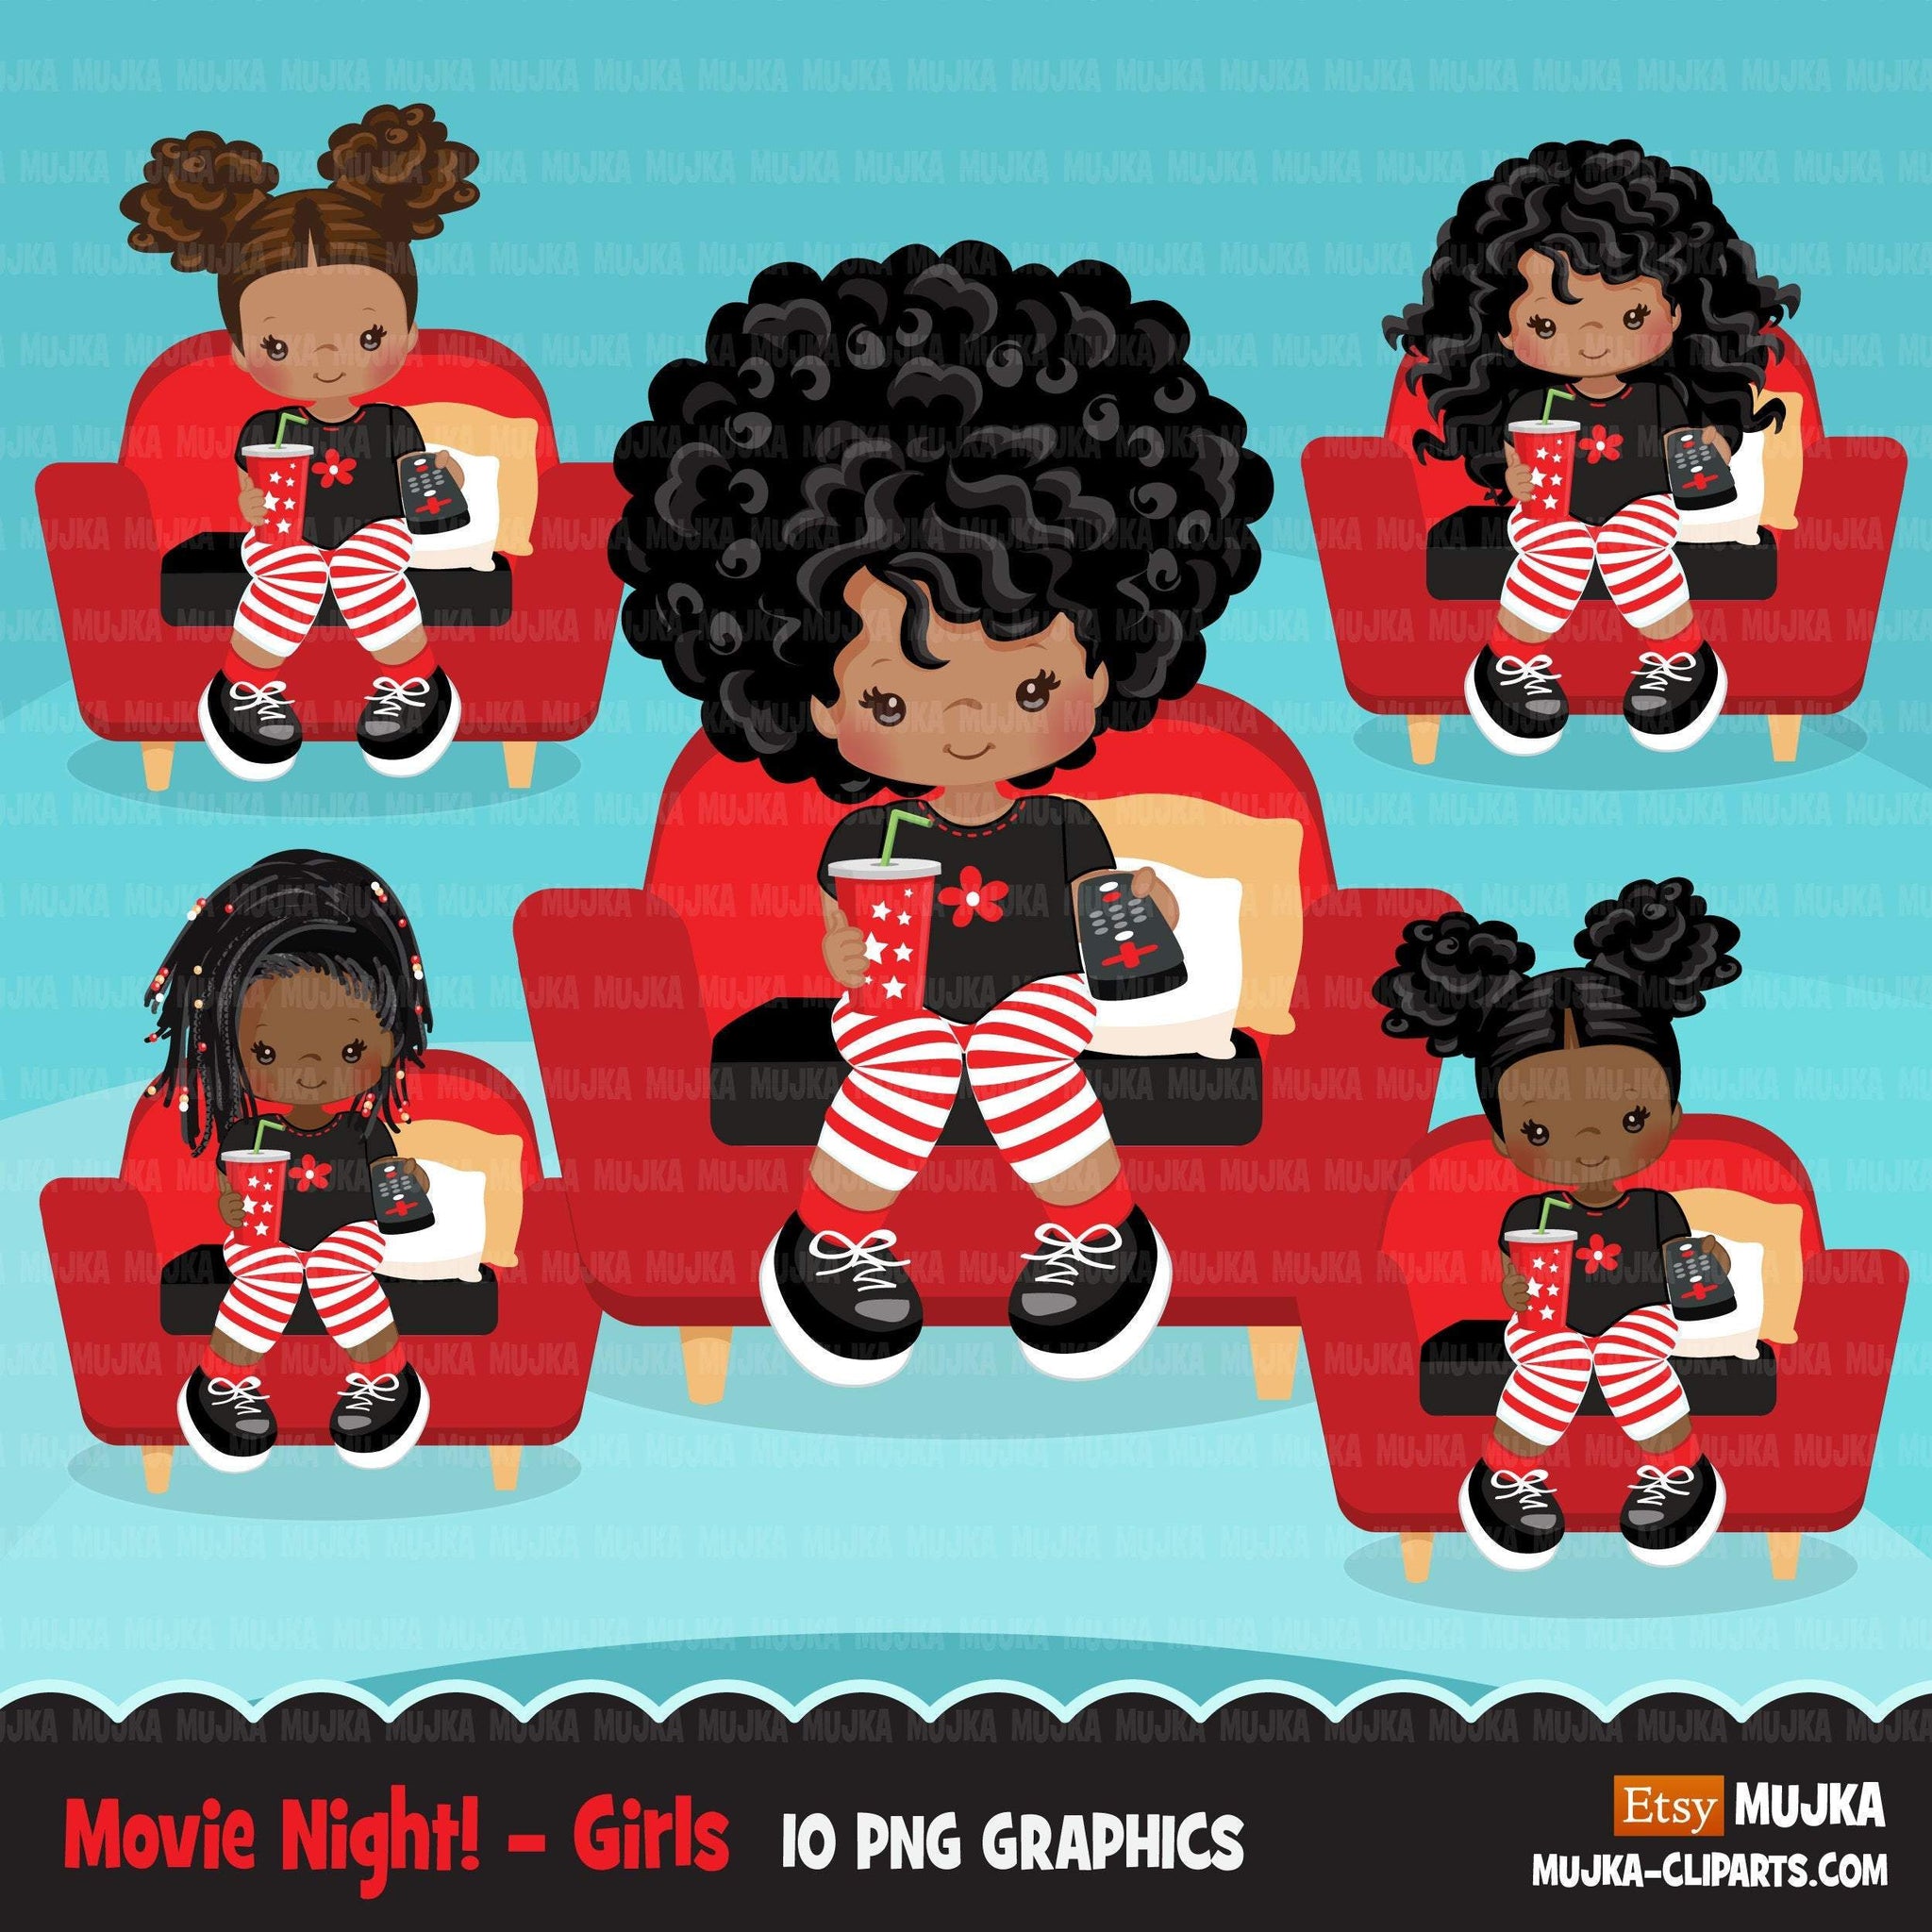 Movie night Clipart, movie birthday party, black girls graphics, TV remote, popcorn, sleepover party Png clip art